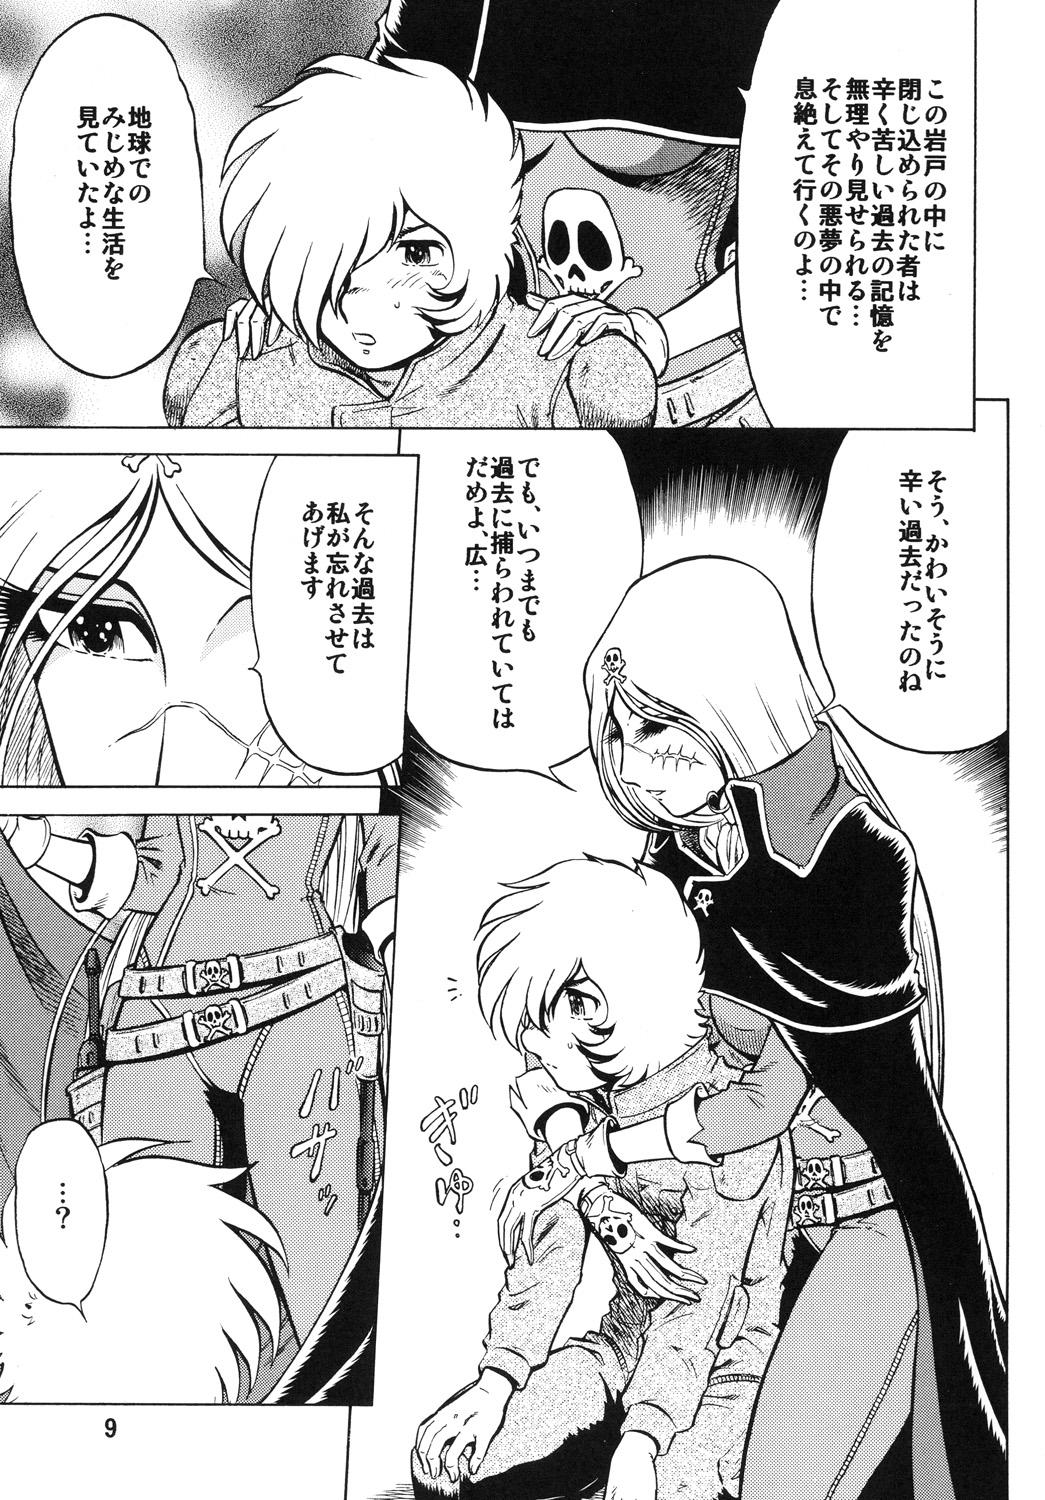 Pussy Fingering NightHead+2 - Space pirate captain harlock Playing - Page 8